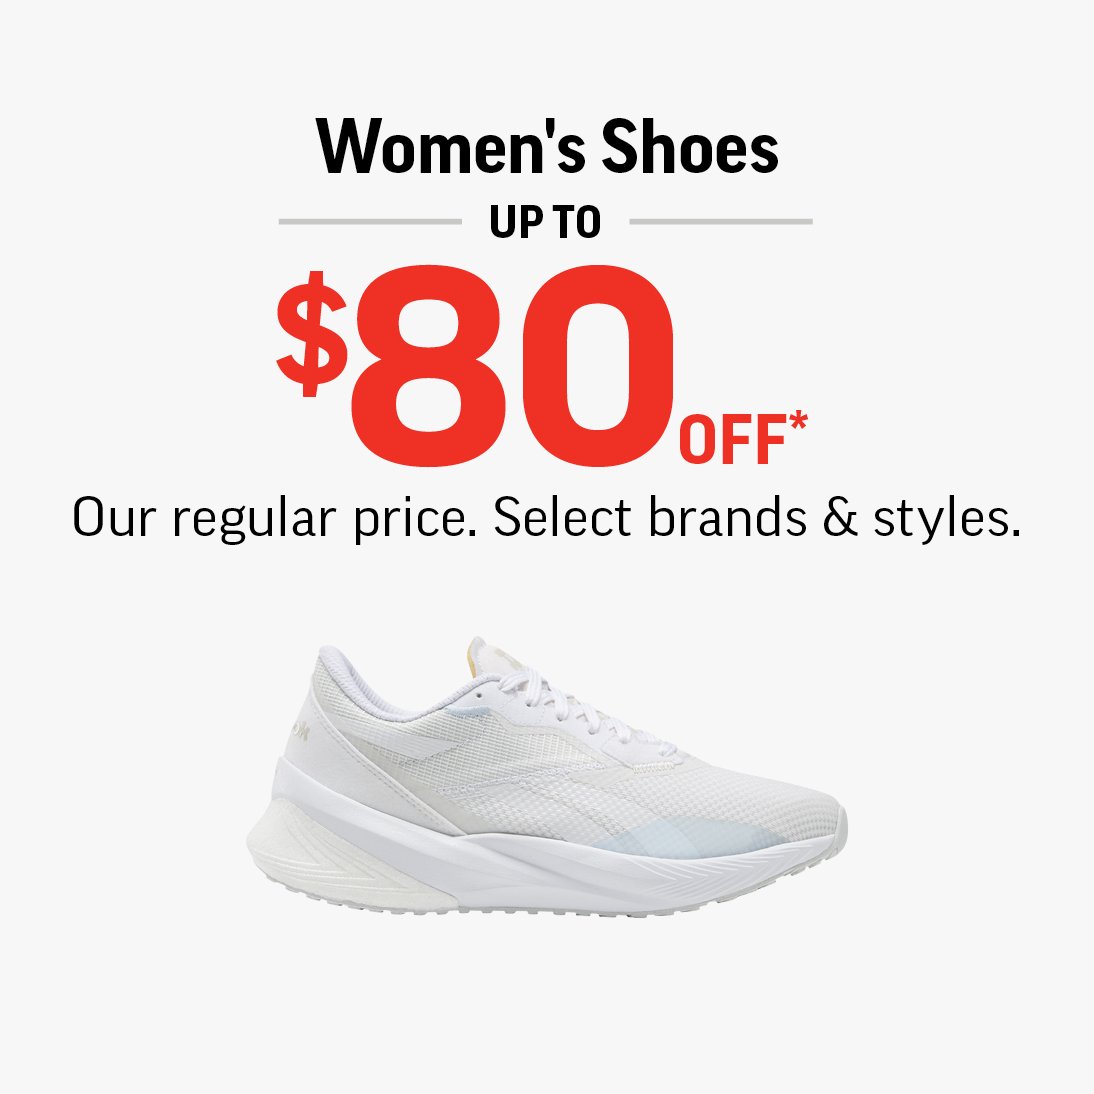 WOMEN'S SHOES UP TO $80 OFF